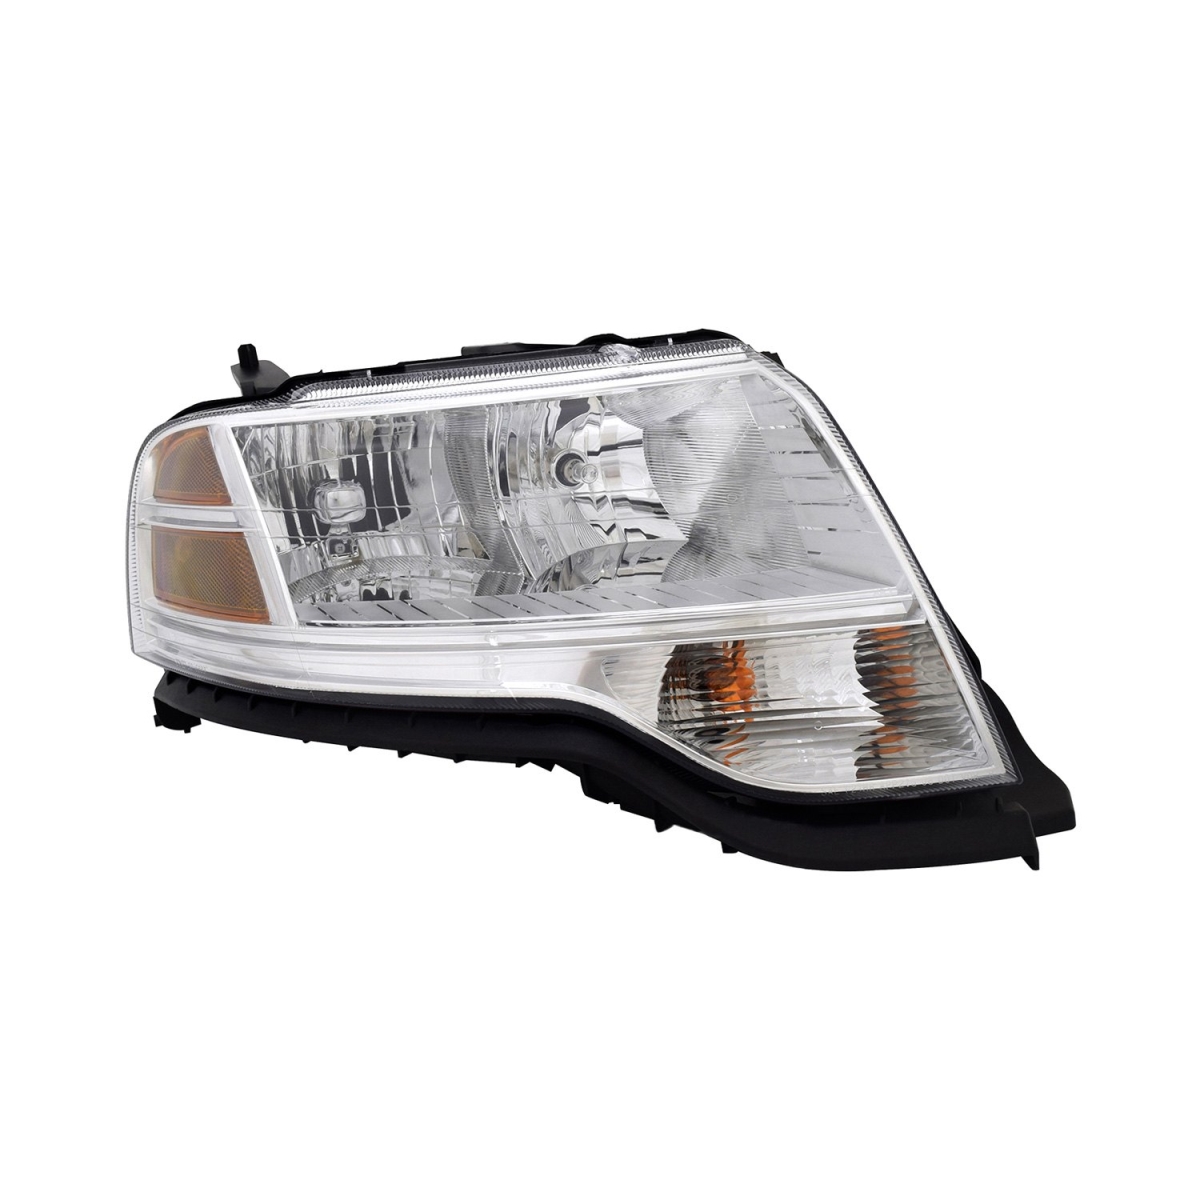 20-6883-00-9 Head Lamp for 2008-2009 Ford Taurus X -  TYC PRODUCTS